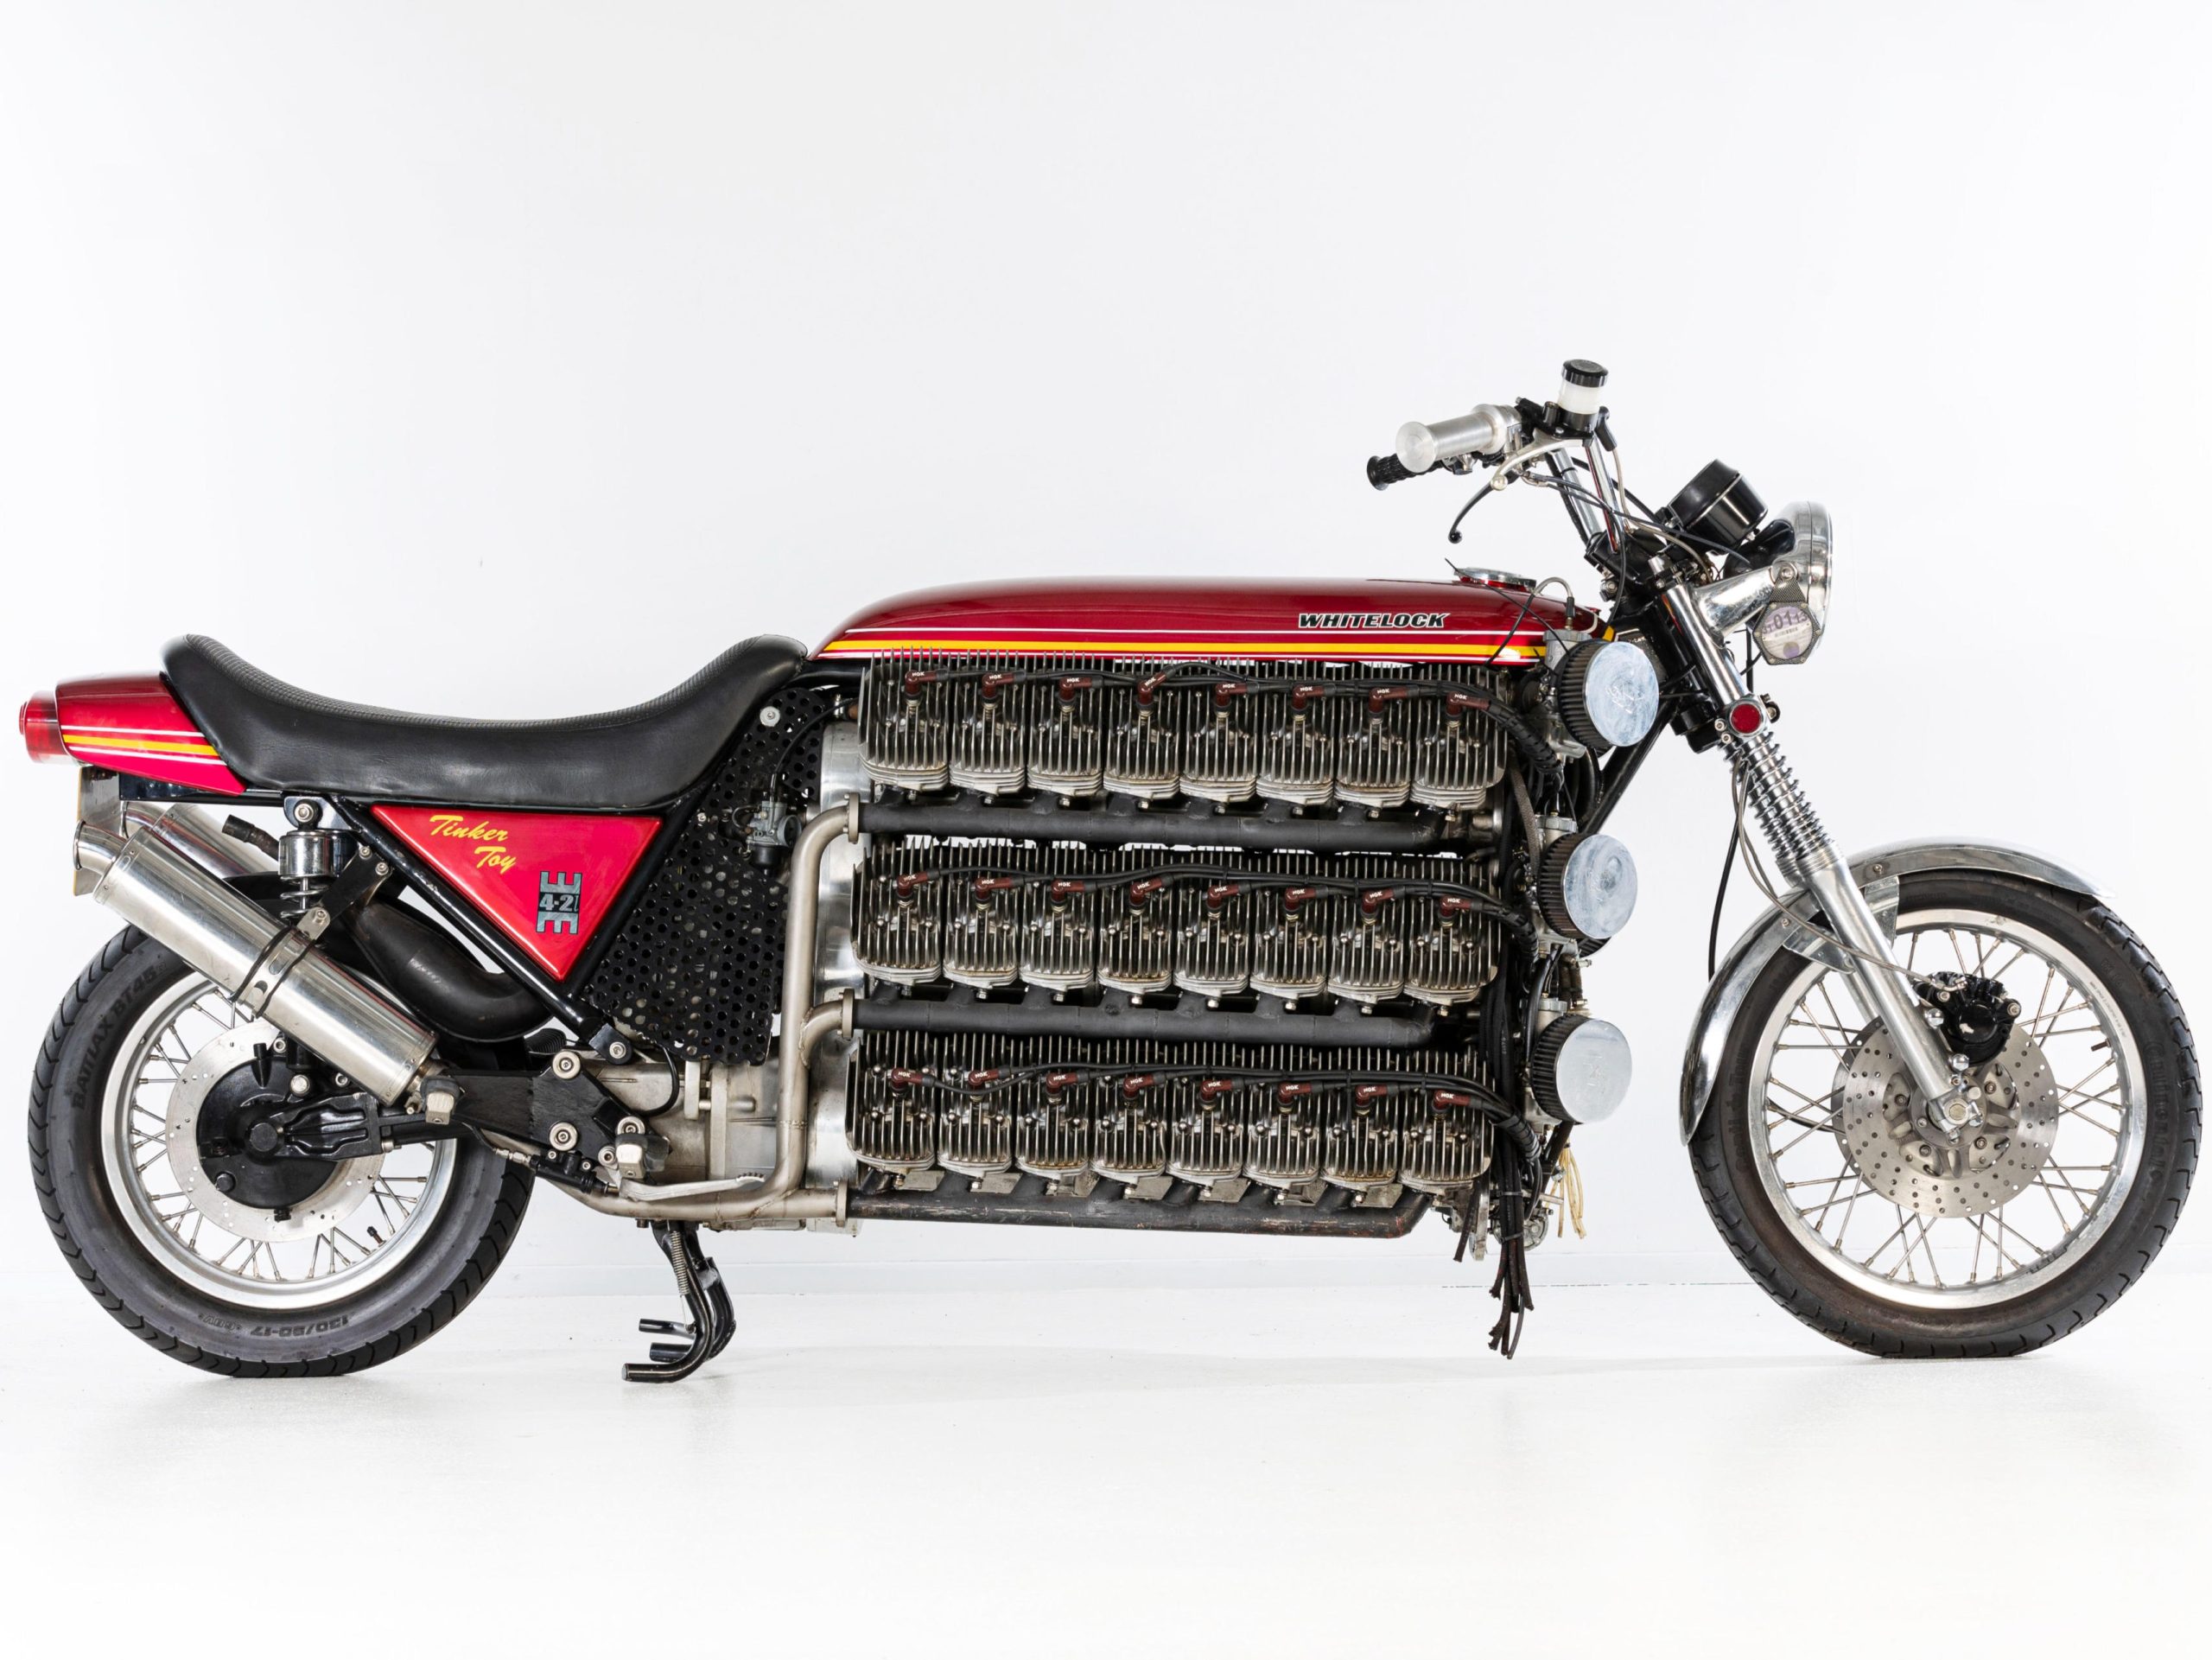 What Has 48 Cylinders, 2 Wheels, and 1 World Record? This Motorcycle